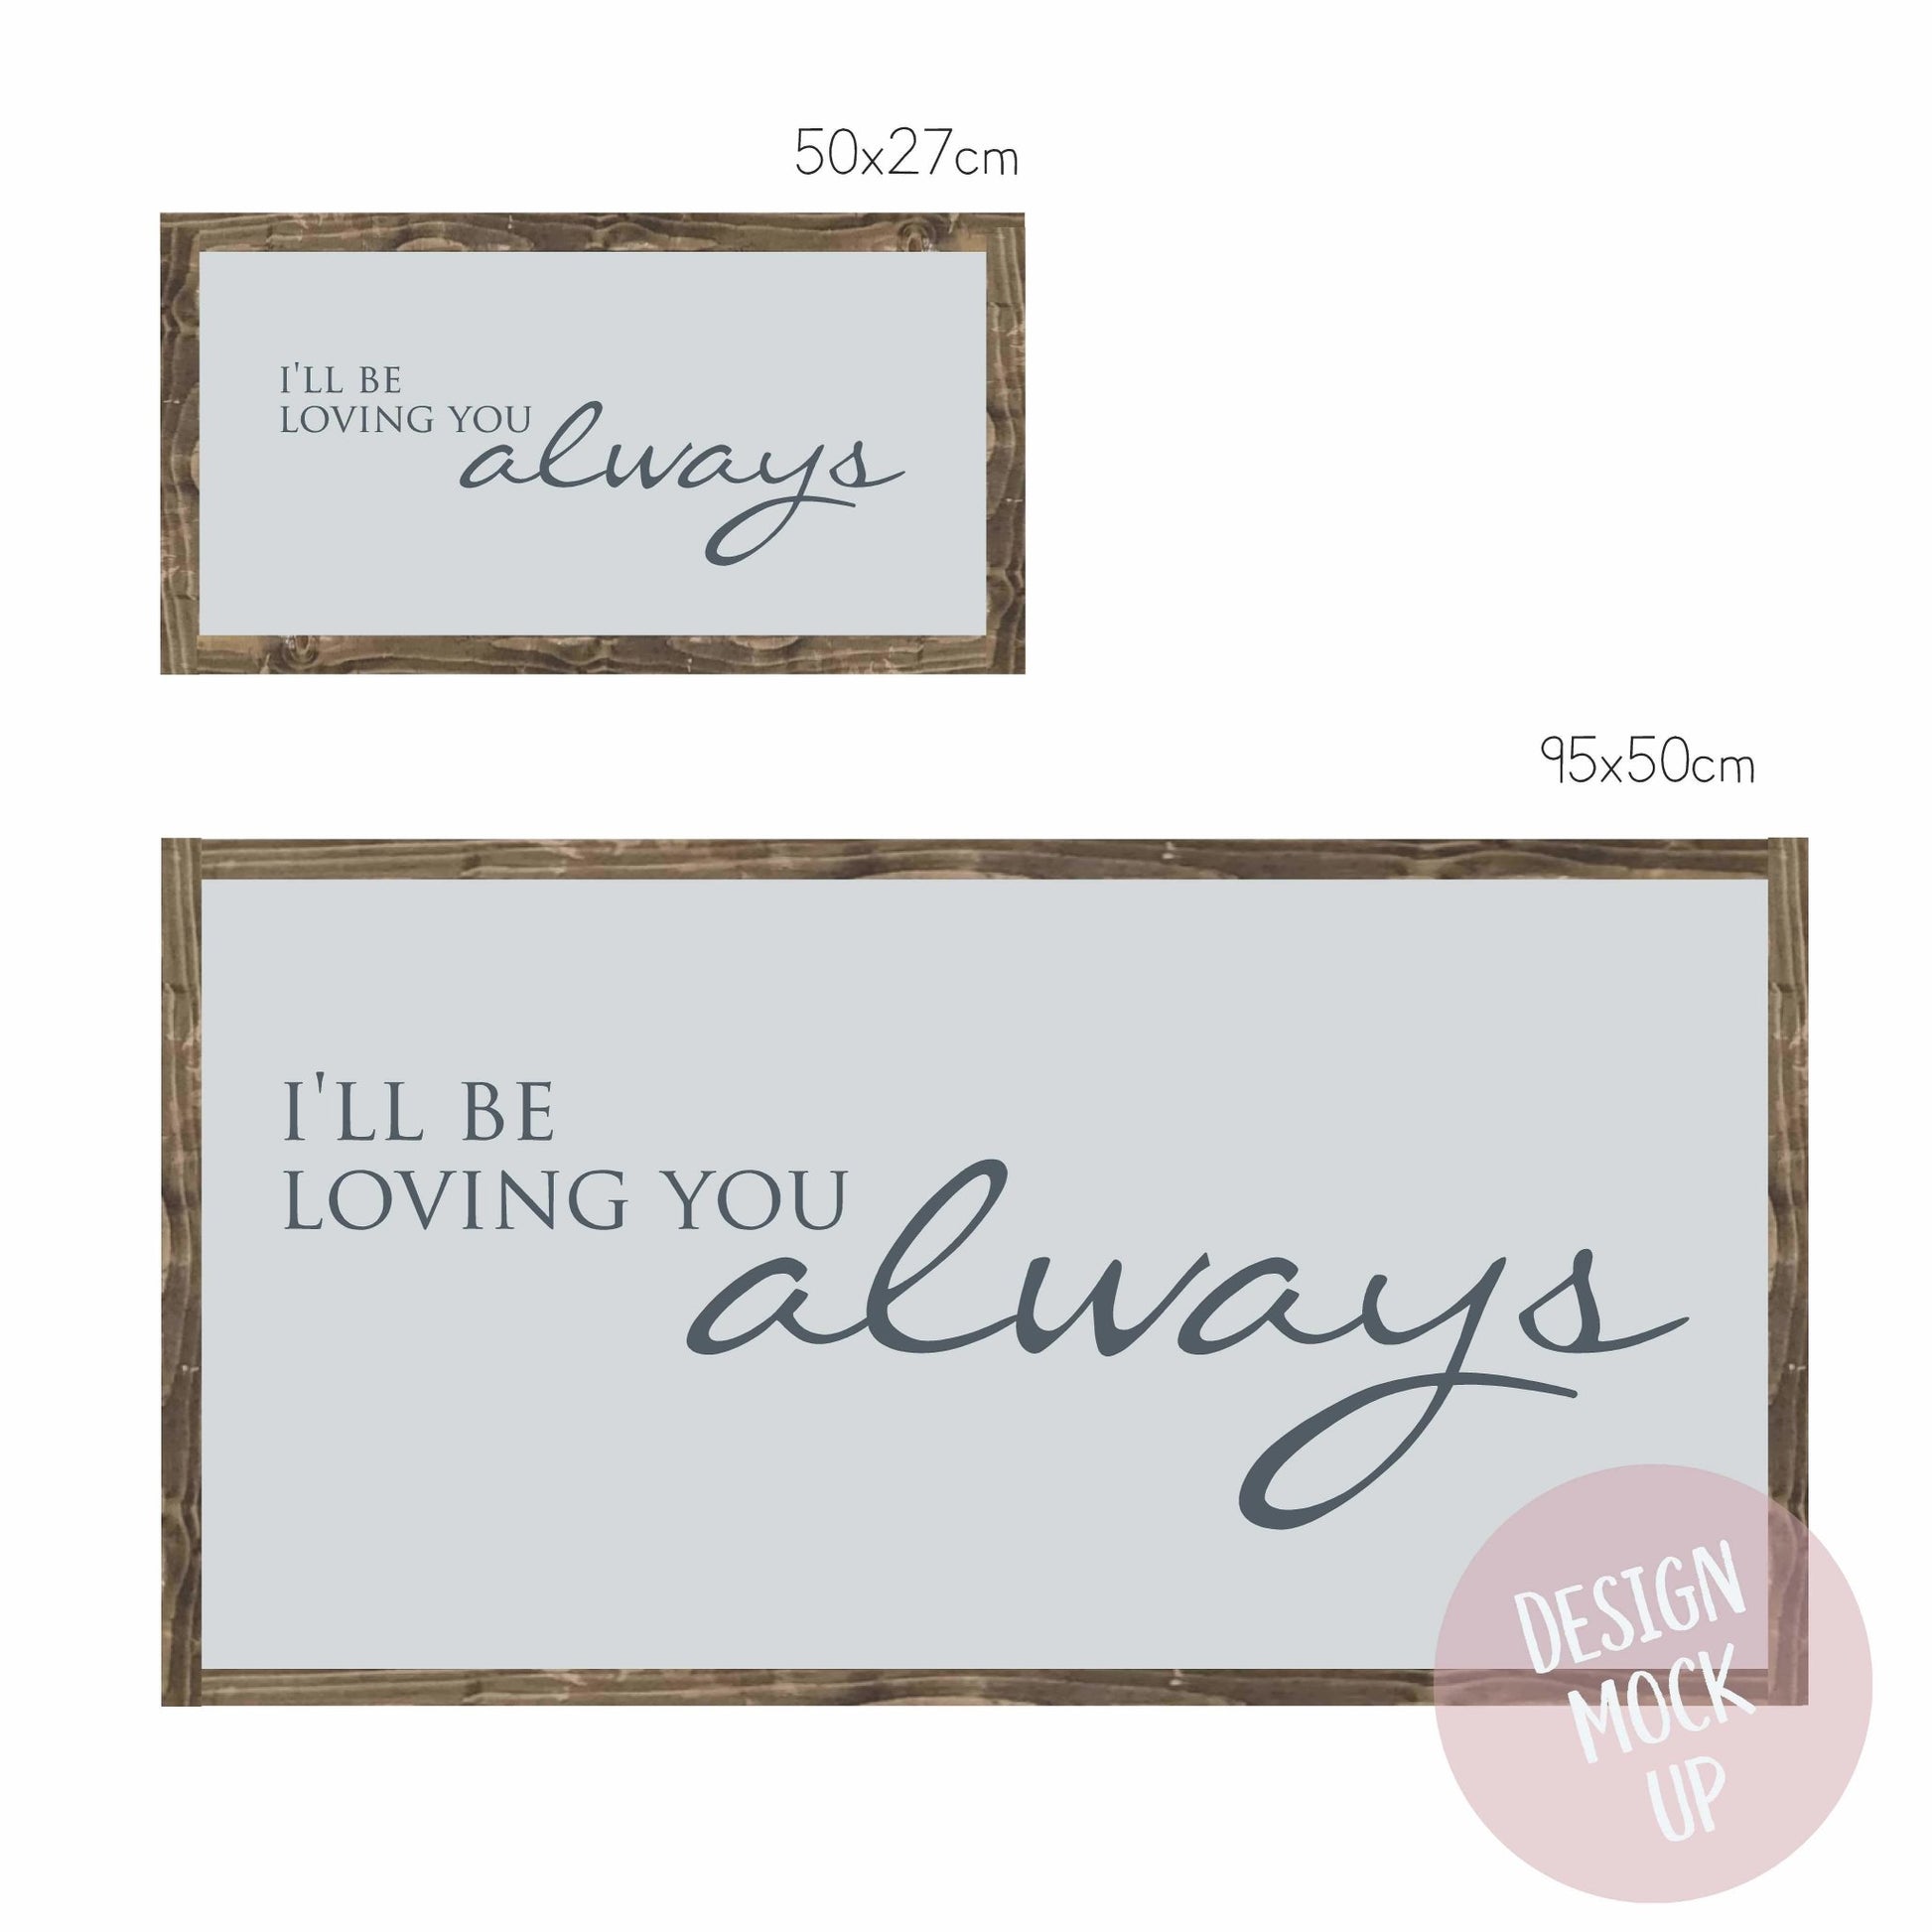 I'll Be Loving You Always | Framed Wood Sign - The Imperfect Wood Company - Framed Wood Sign